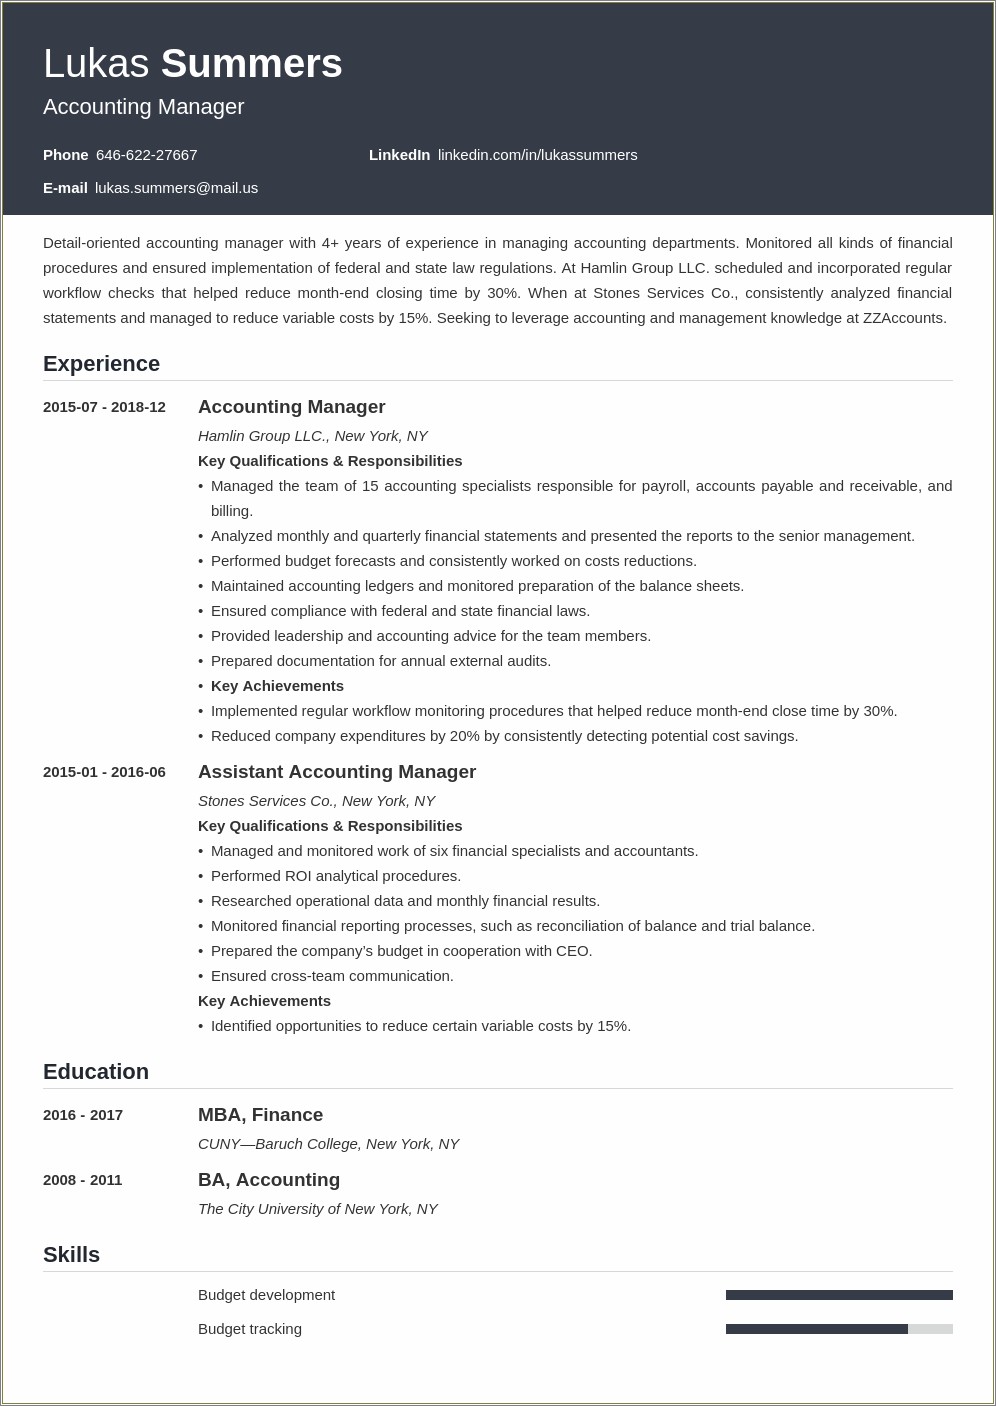 Manager Of External Reporting Resume Examples